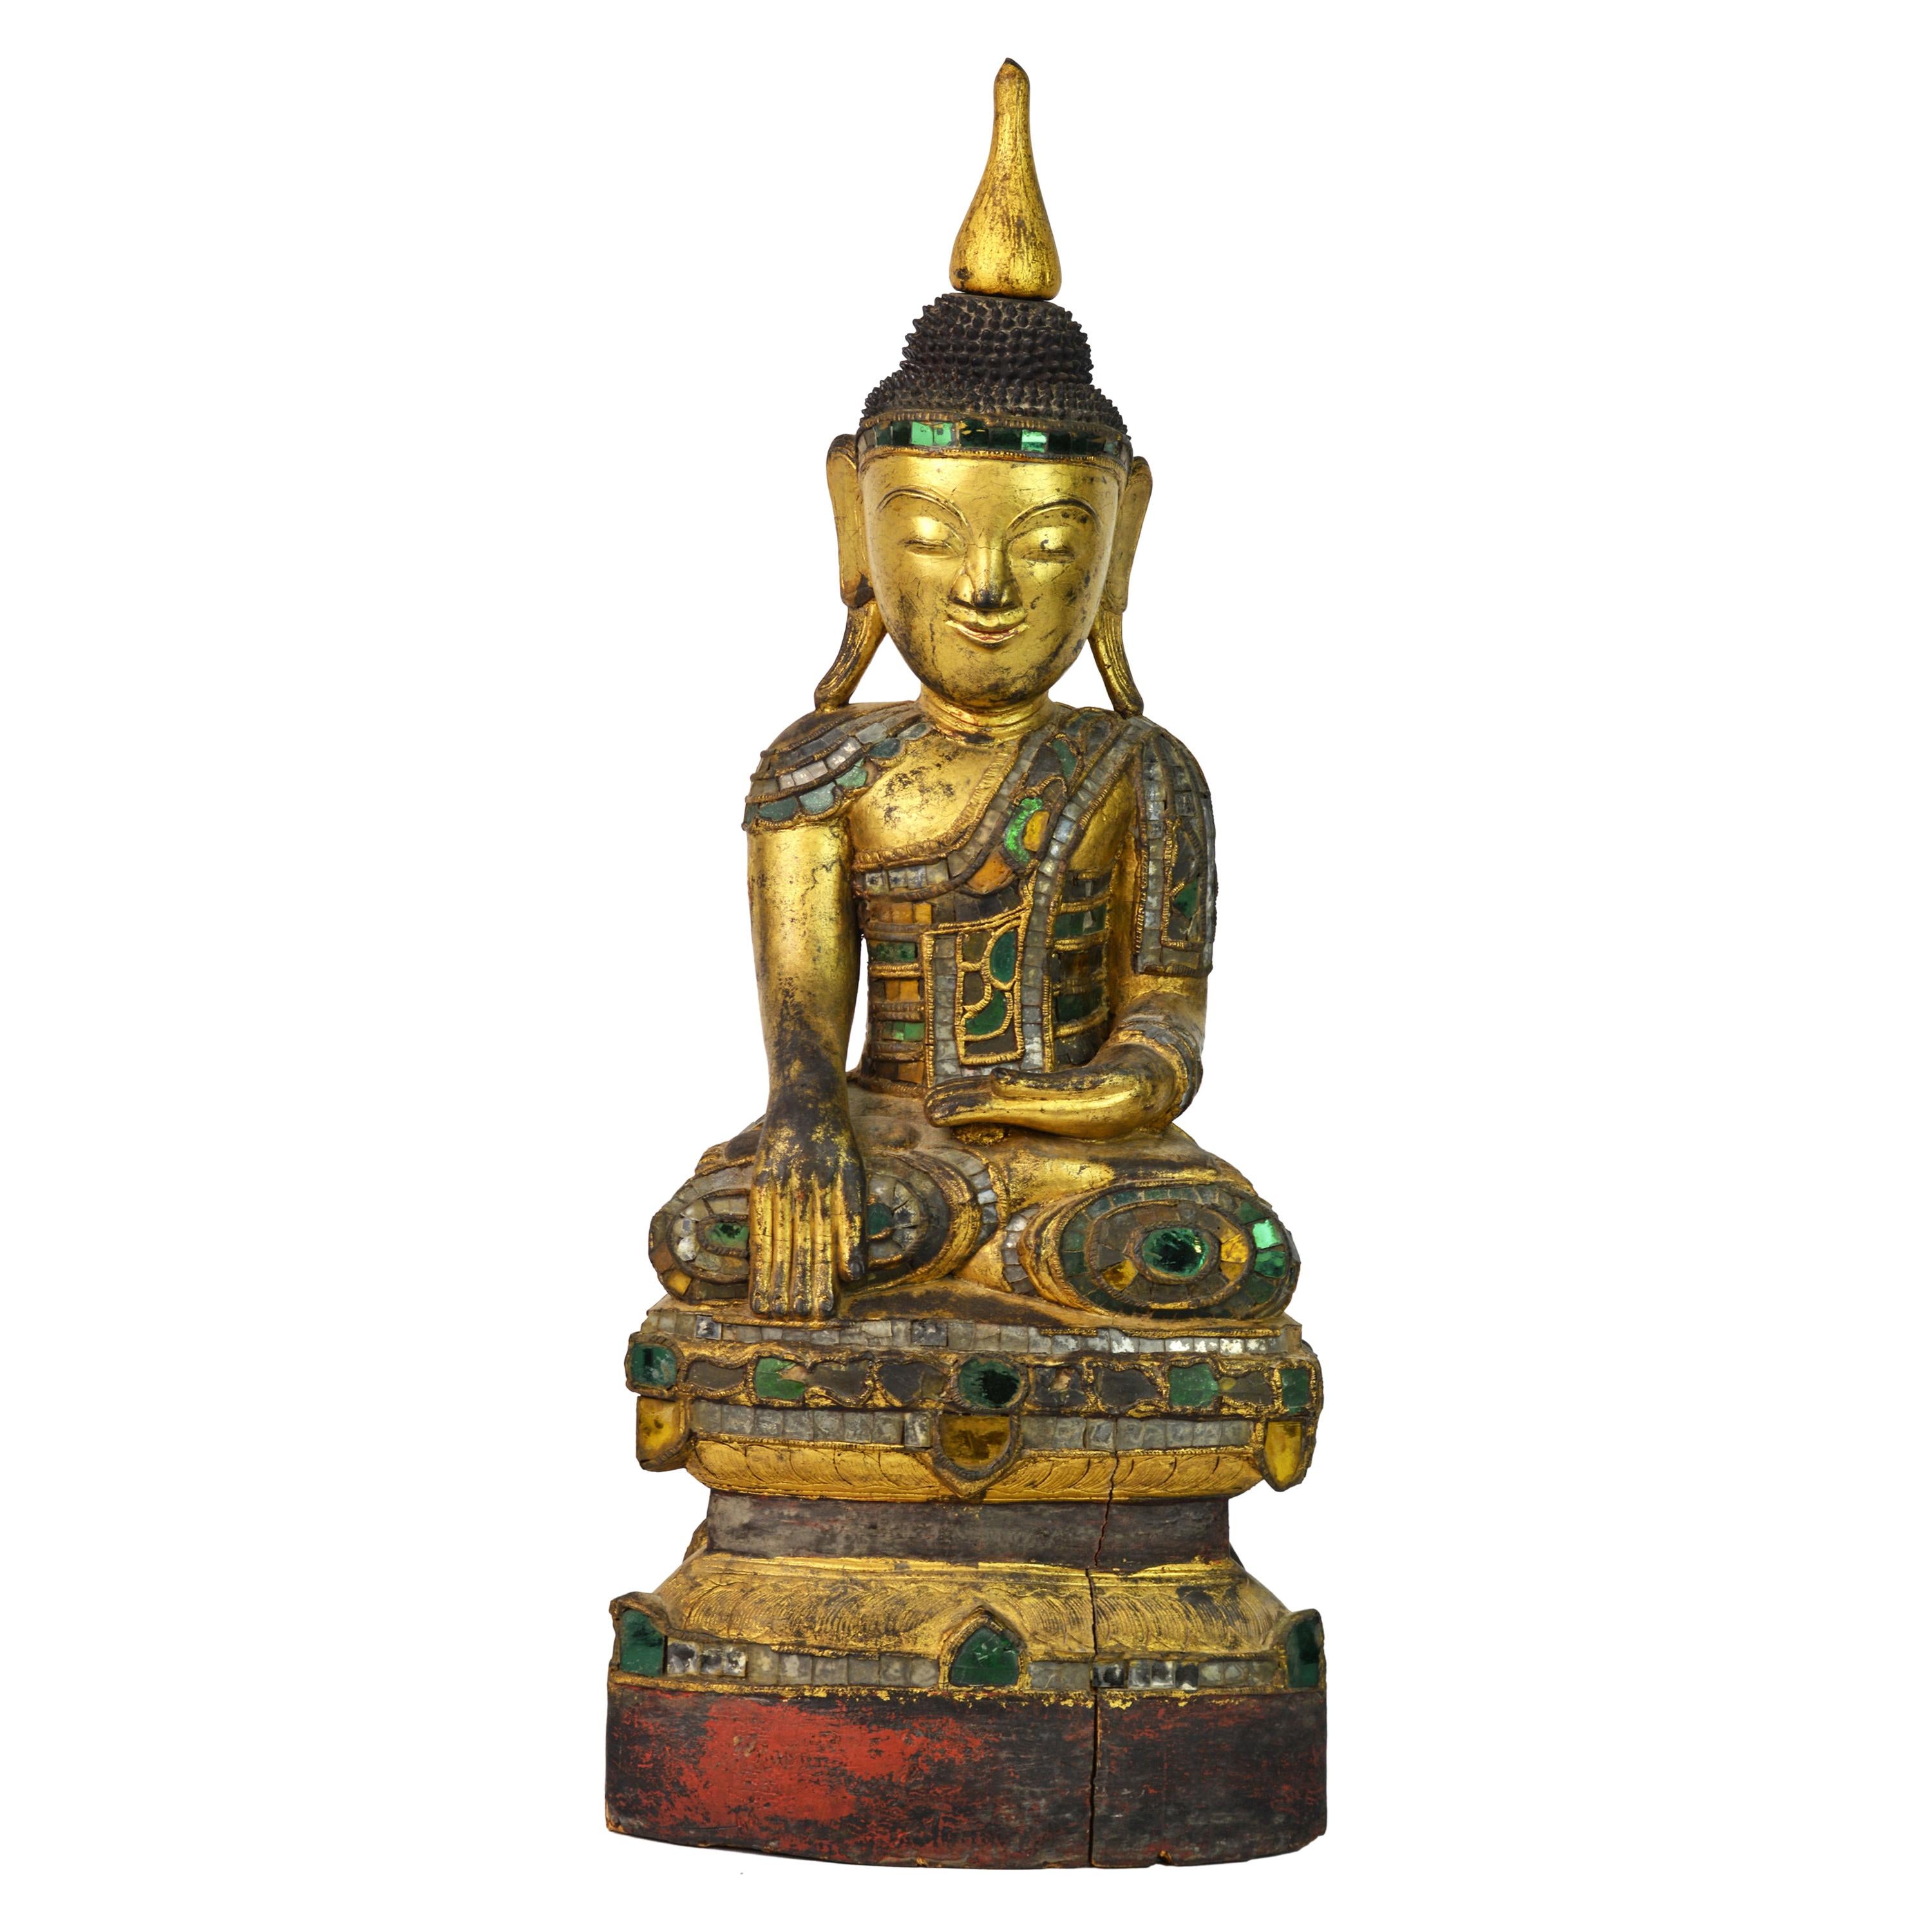 19th Century Richly Glass Inlaid Carved Burmese Shan Buddha Seated on a Throne